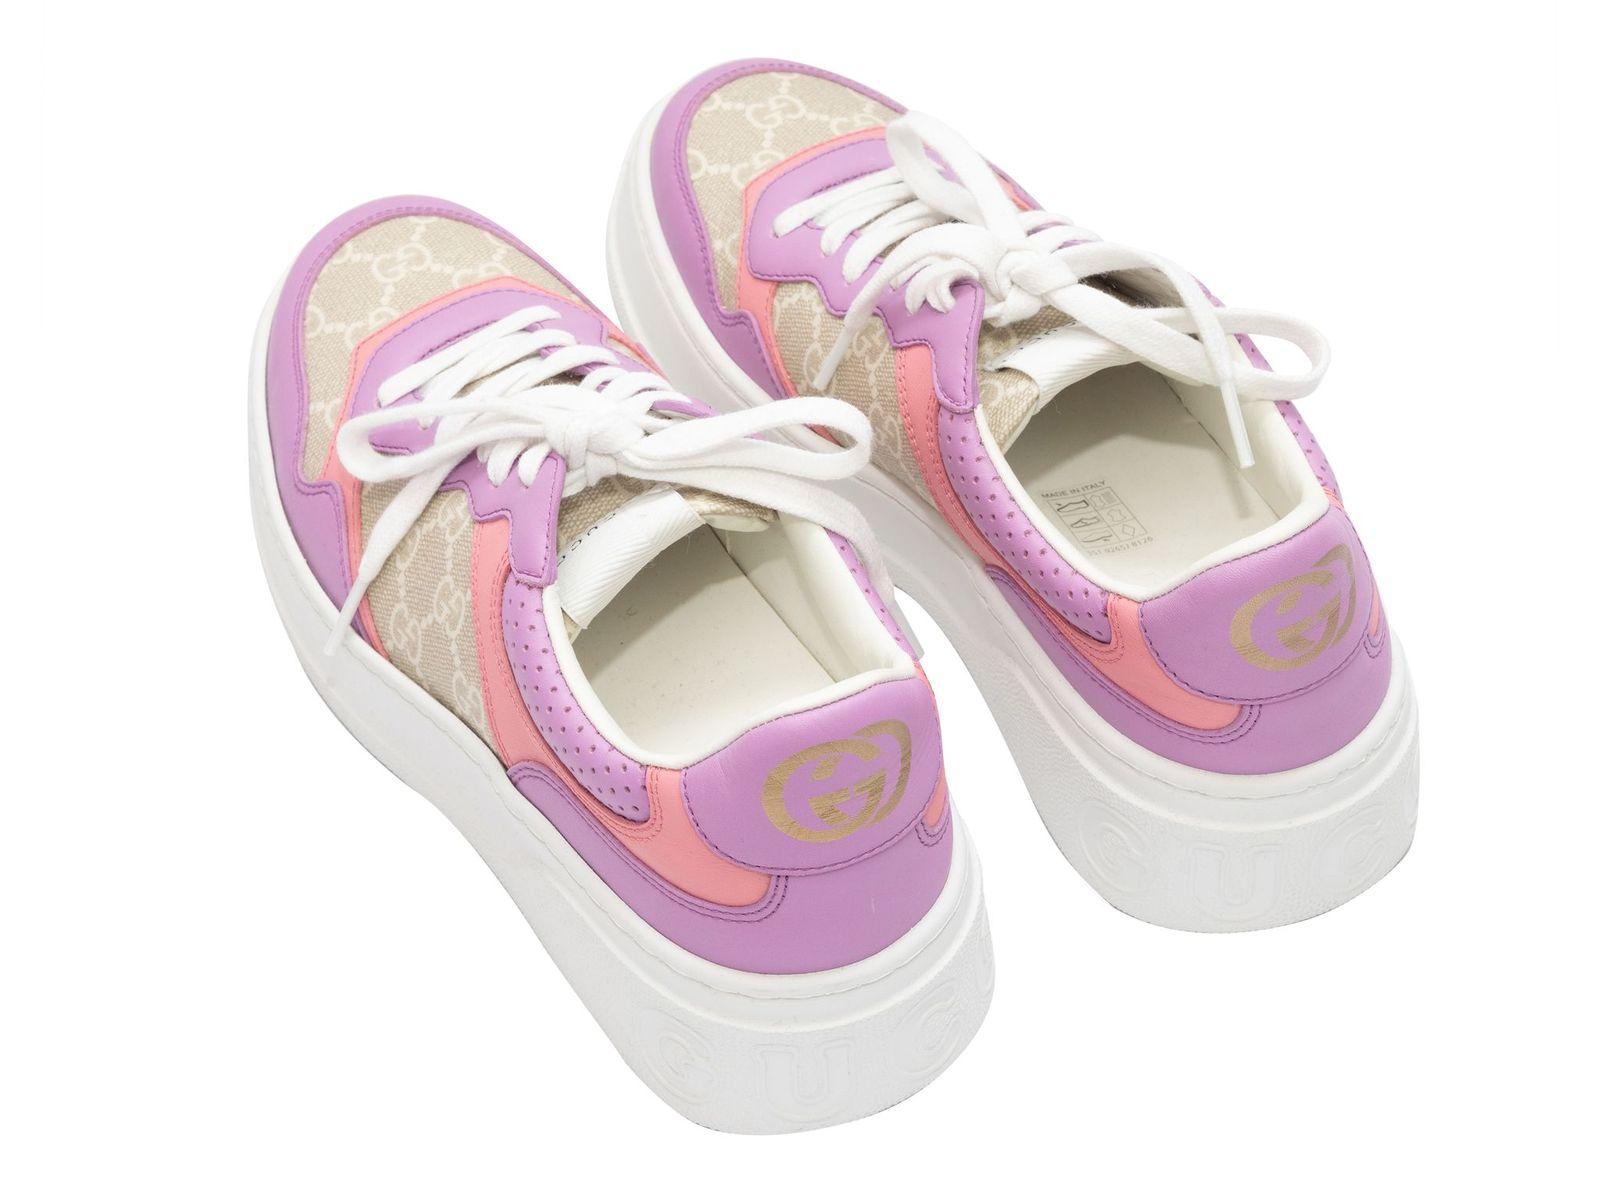 Women's Gucci Lavender & Multicolor Leather & Coated Canvas Sneakers